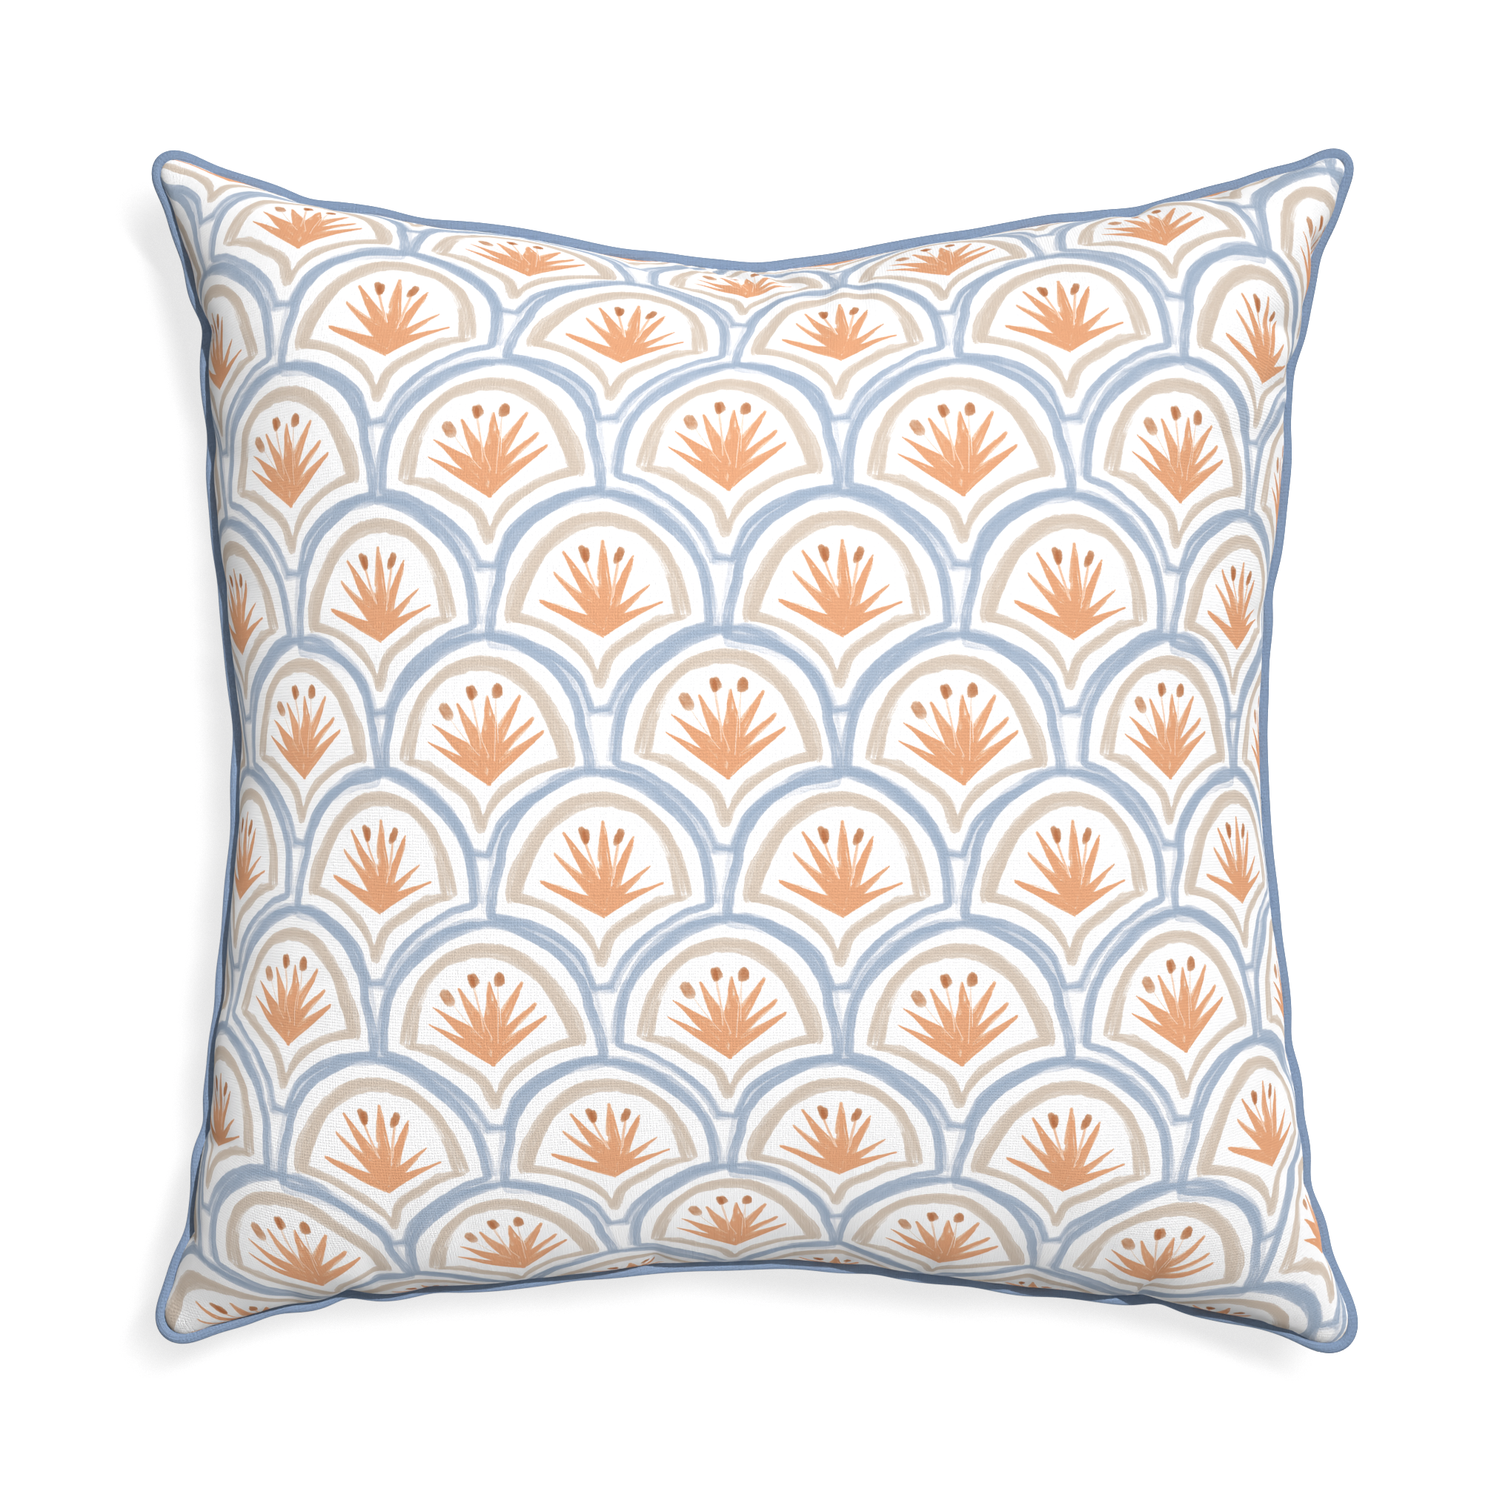 Euro-sham thatcher apricot custom art deco palm patternpillow with sky piping on white background